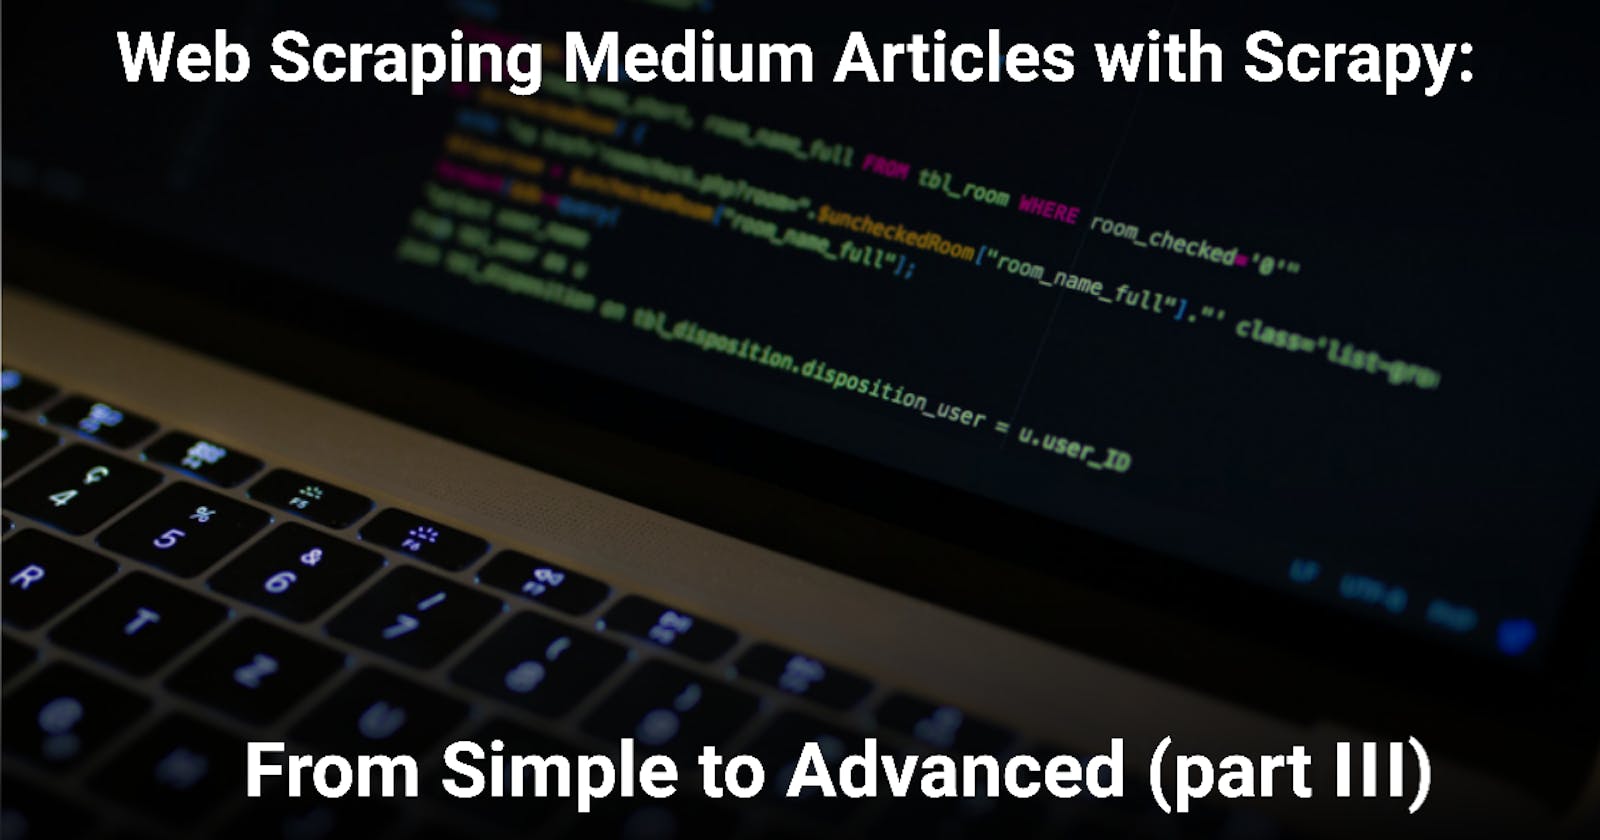 Web Scraping Medium Articles with Scrapy: From Simple to Advanced (part III)